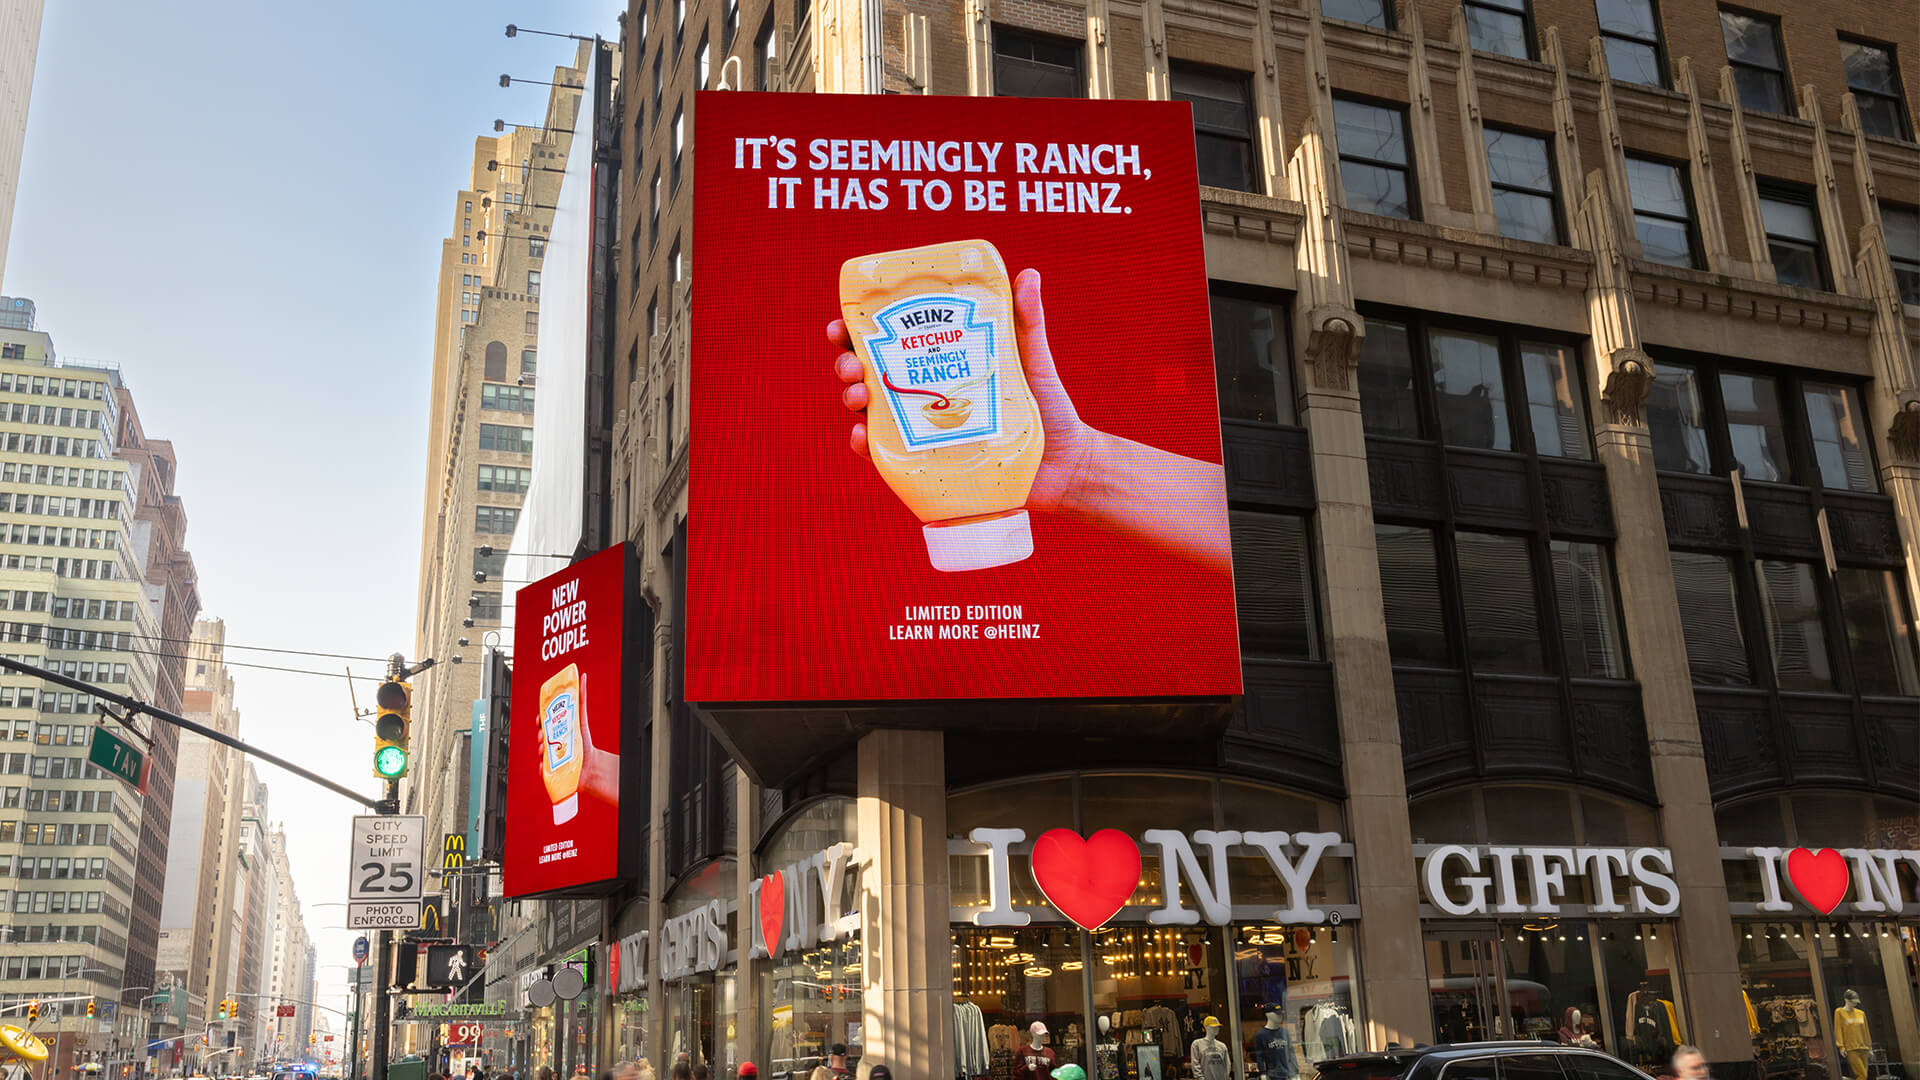 Heinz Ketchup and Seemingly Ranch_2023_Taylor Swift_New York Times Square Ads 2